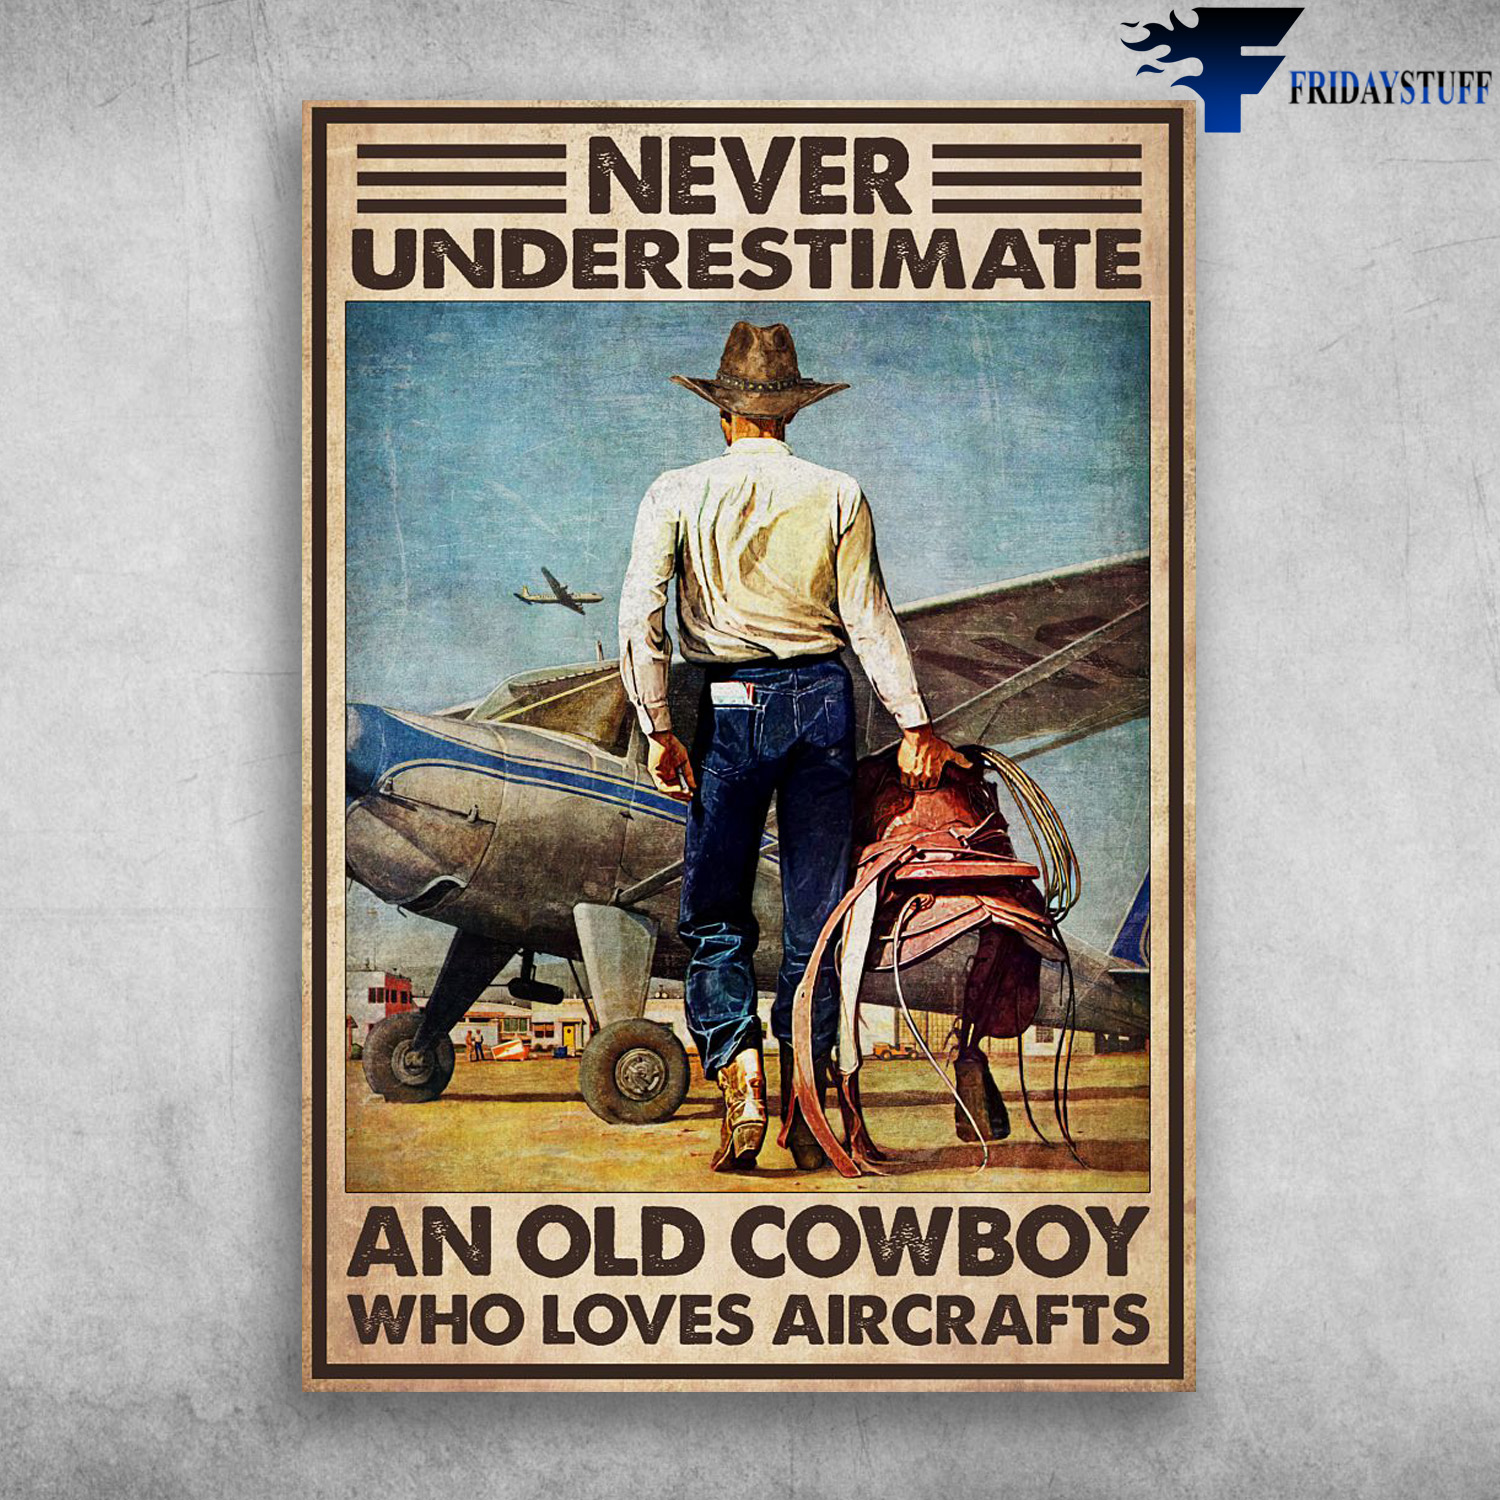 Cowboy Aircrafts - Never Underestimate, An Old Cowboy, Who Loves Aircrafts